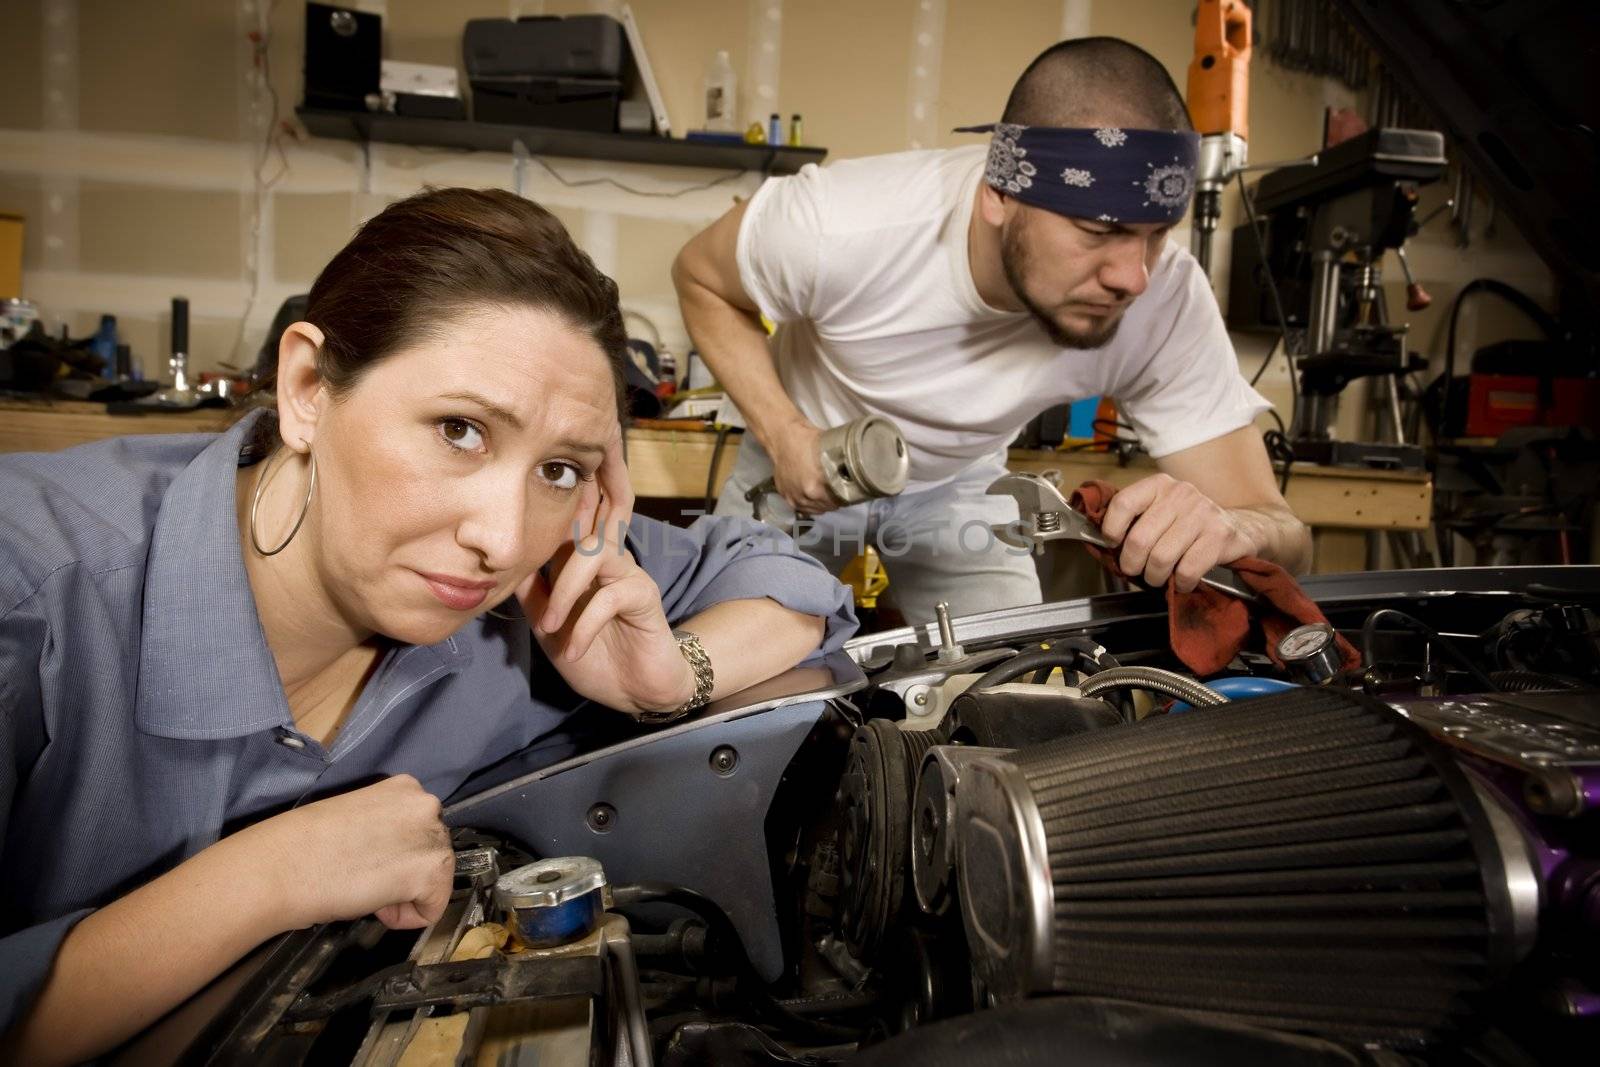 Bored woman with mechanic in background by Creatista